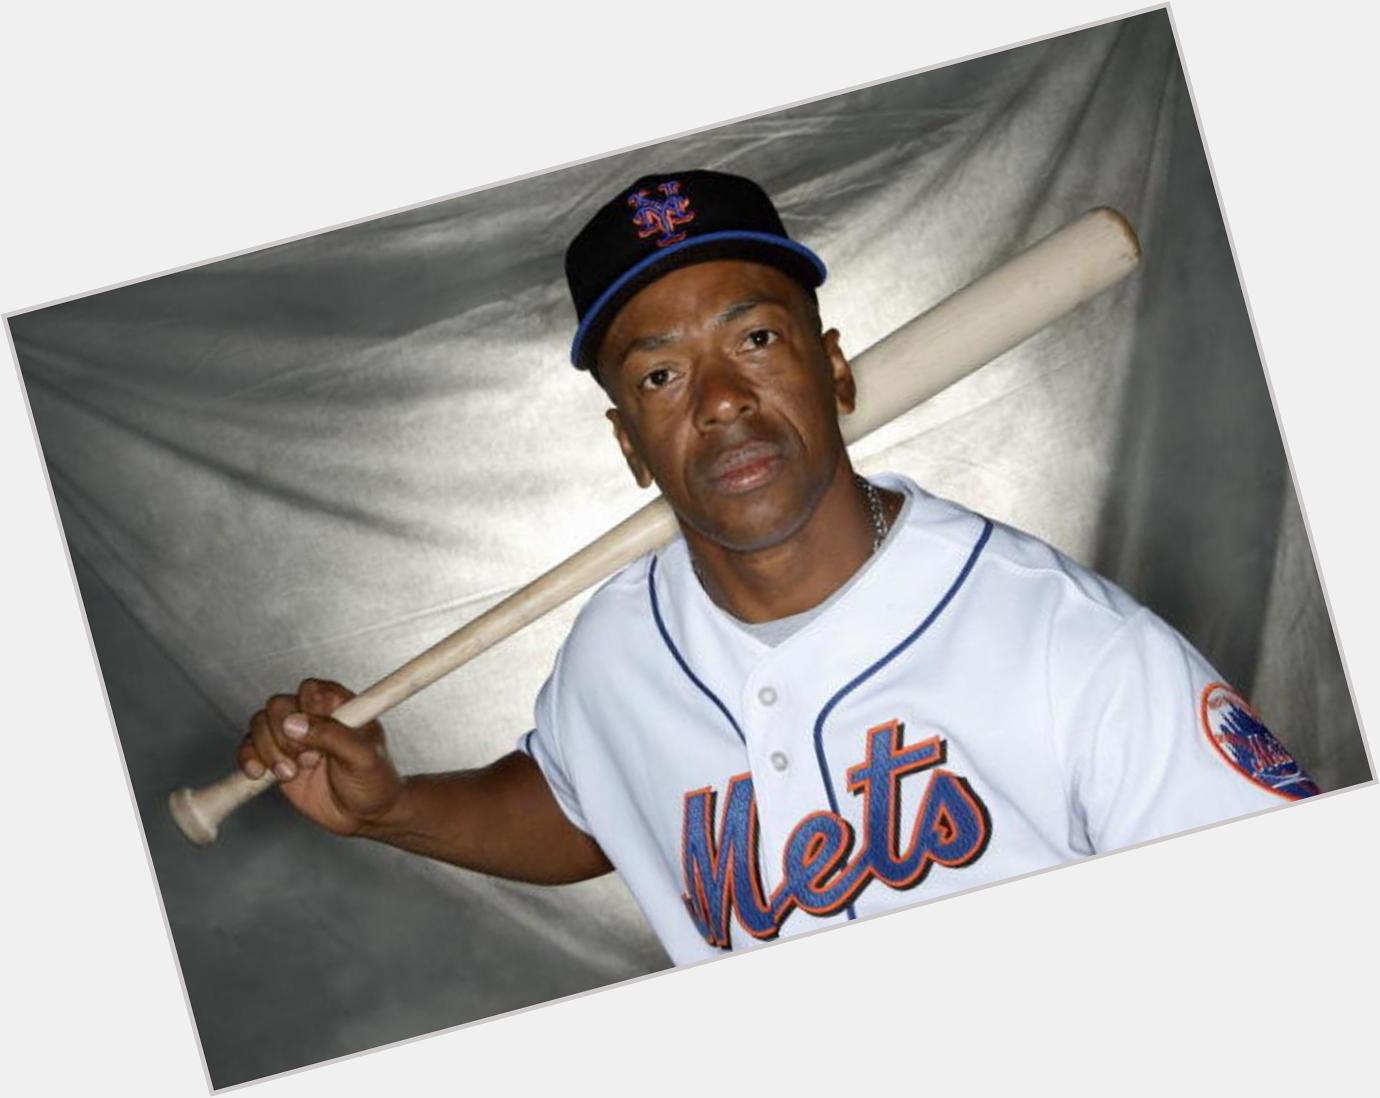 Happy birthday to Julio Franco, who I think is probably still playing somewhere 